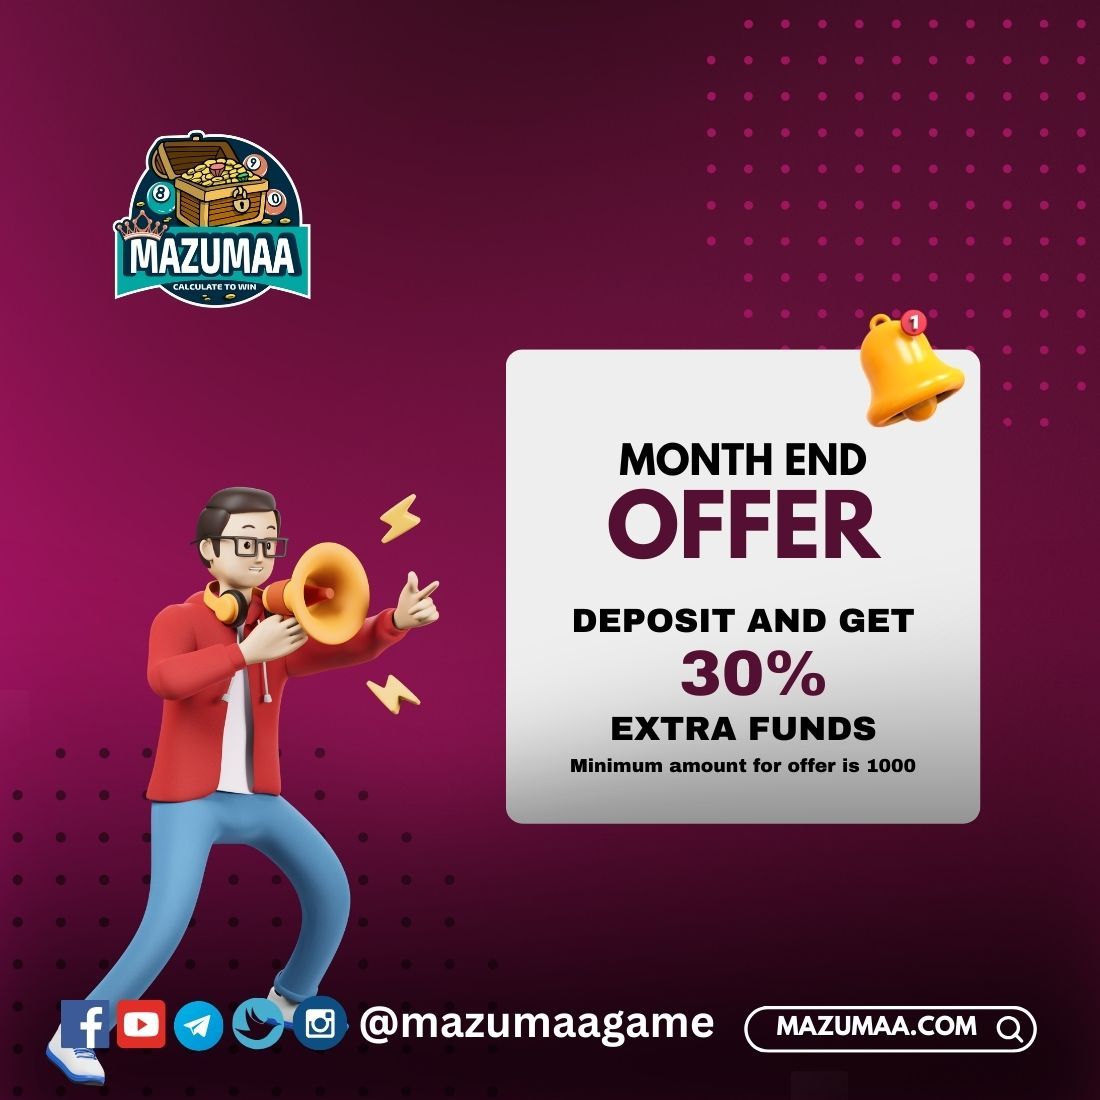 📢End the month with a bang at #Mazumaa! Deposit now and 𝐠𝐫𝐚𝐛 𝐚𝐧 𝐄𝐗𝐓𝐑𝐀 𝟑𝟎% 𝐟𝐮𝐧𝐝𝐬 𝐭𝐨 𝐩𝐥𝐚𝐲 𝐰𝐢𝐭𝐡!🚀🤑

𝐌𝐢𝐧𝐢𝐦𝐮𝐦 𝐩𝐥𝐚𝐲, 𝐦𝐚𝐱𝐢𝐦𝐮𝐦 𝐩𝐚𝐲!😱 
Boost your balance, boost your chances! Deposit today! ✨ #MazumaaMagic #MonthEndMania #DepositBonus